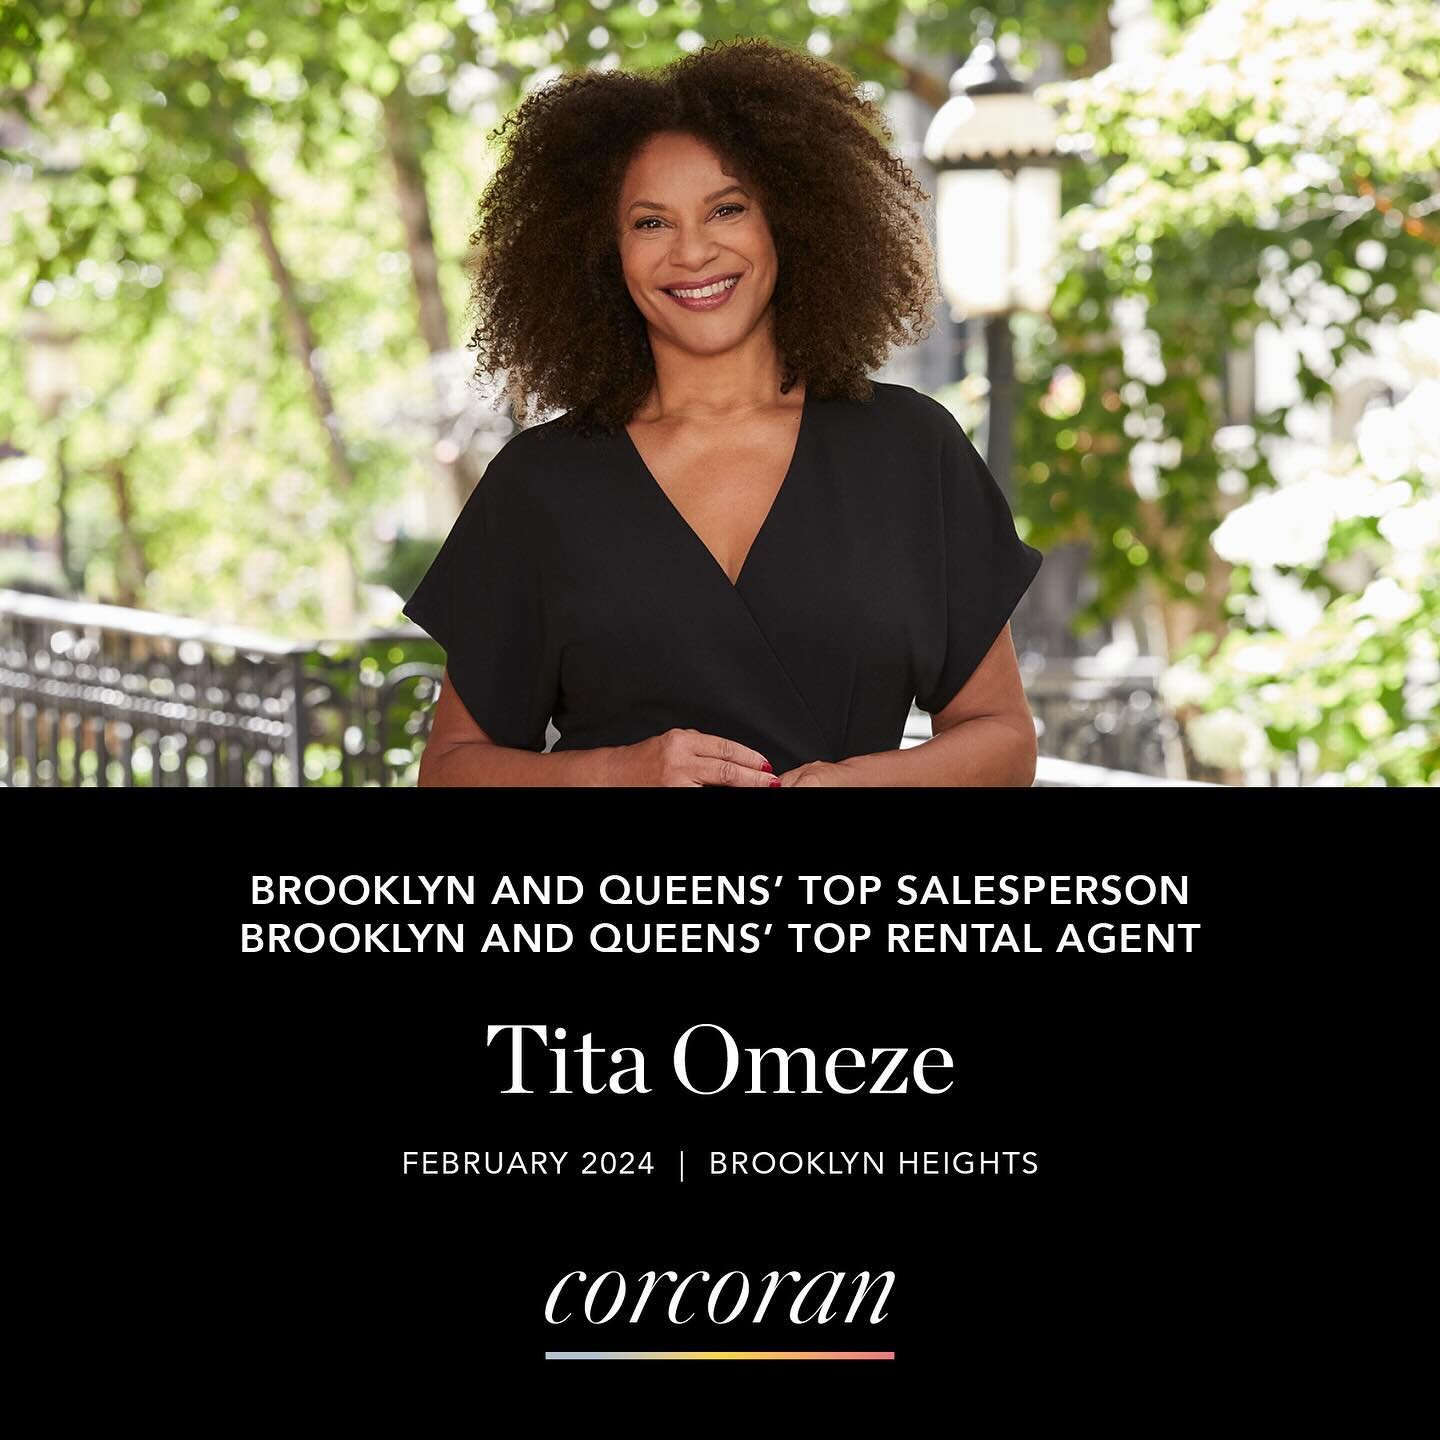 February was a busy month helping clients with their real estate needs.  Very rewarding to learn I made Corcoran&rsquo;s top six for sales AND top 20 for rentals. Eternally grateful for my clients and colleagues 💕 

✨You live the dream, I help creat